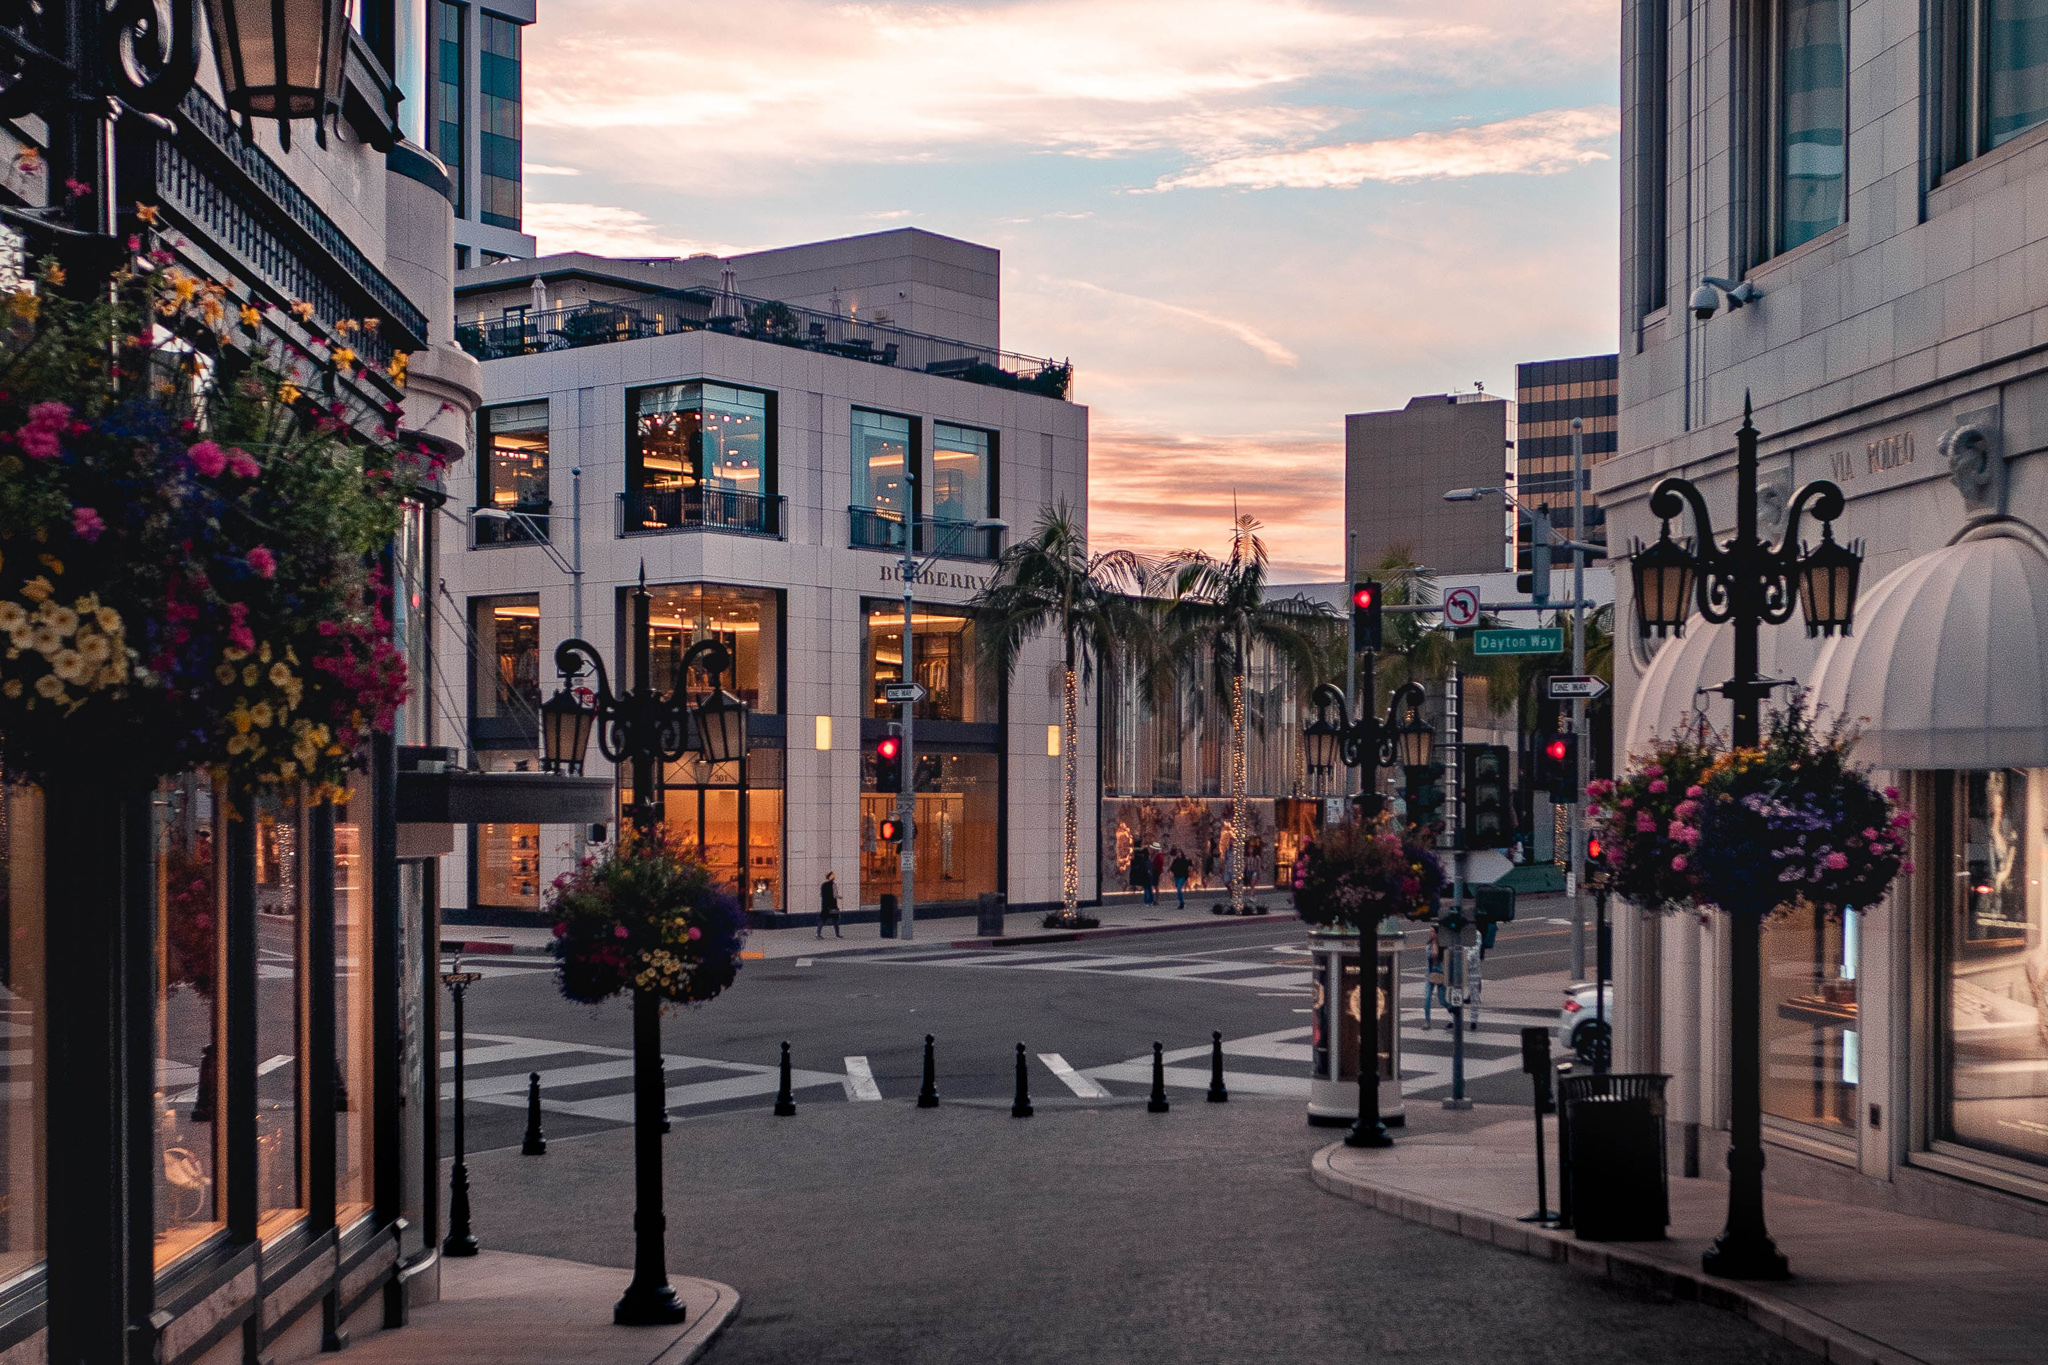 Rodeo Drive in Los Angeles - Tours and Activities